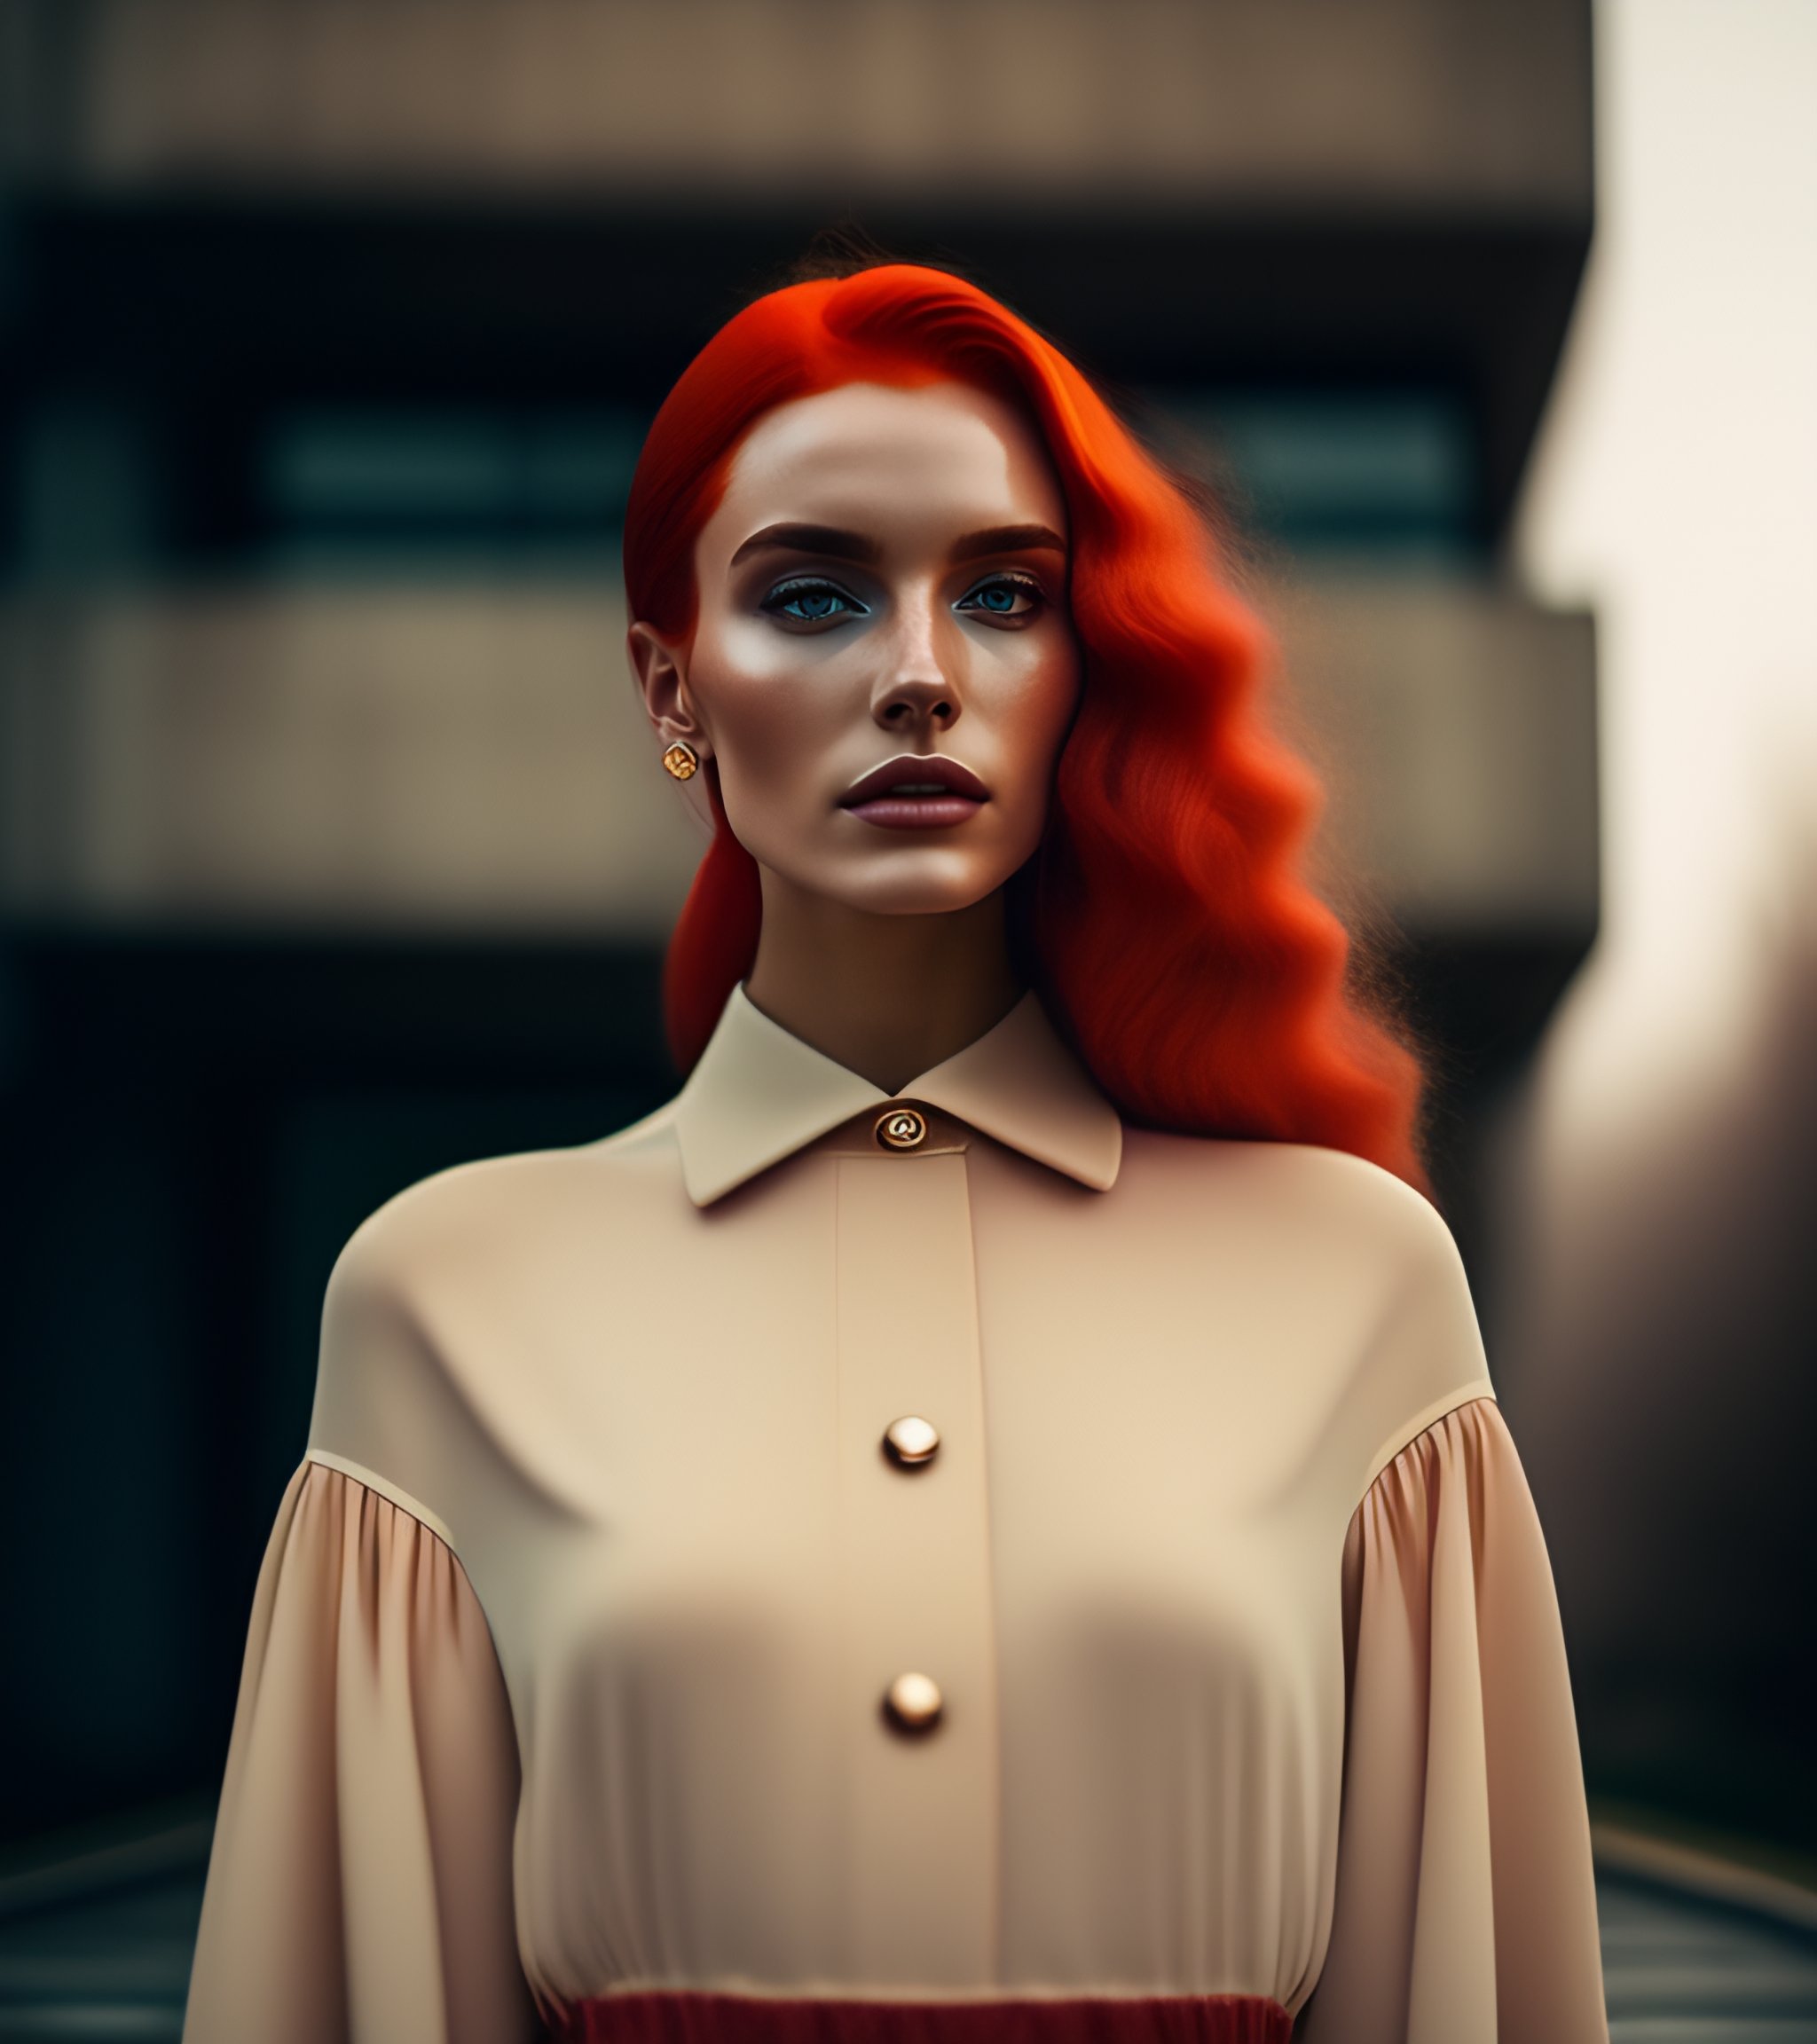 Lexica Portrait Of Women With Red Hair Ethereal Dreamy Foggy